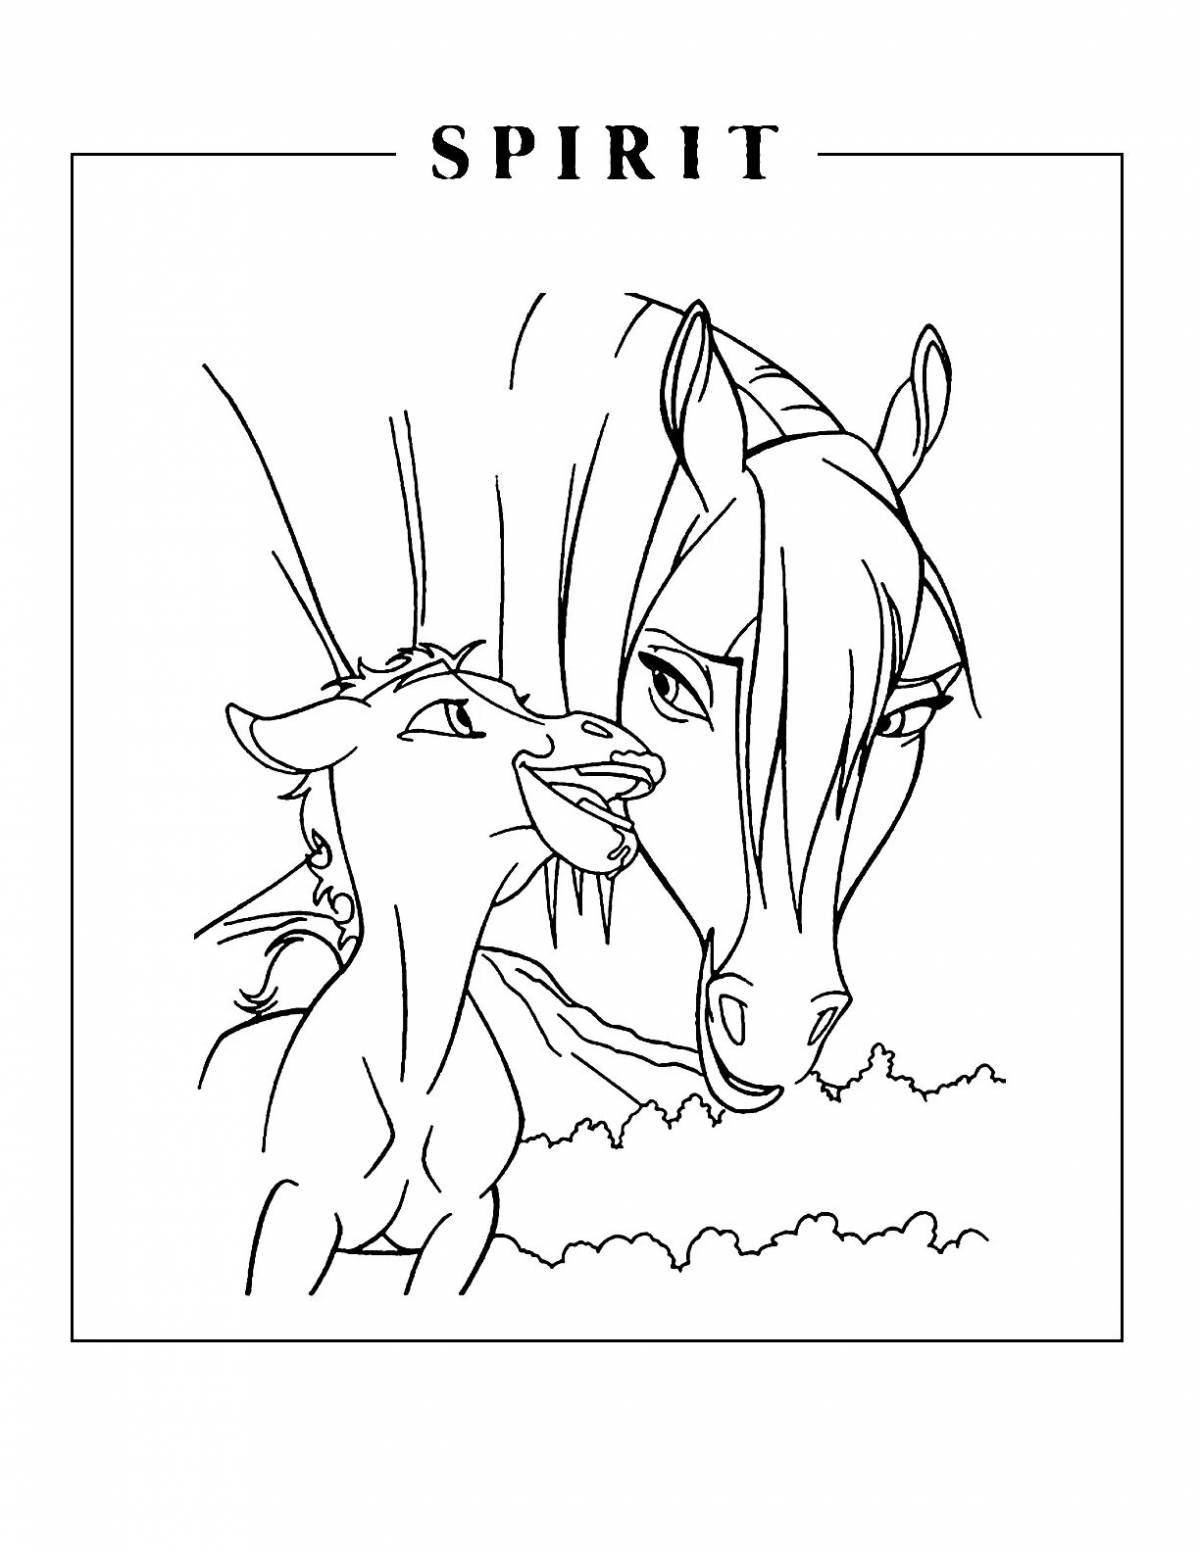 Coloring page tempting spiritist defiant